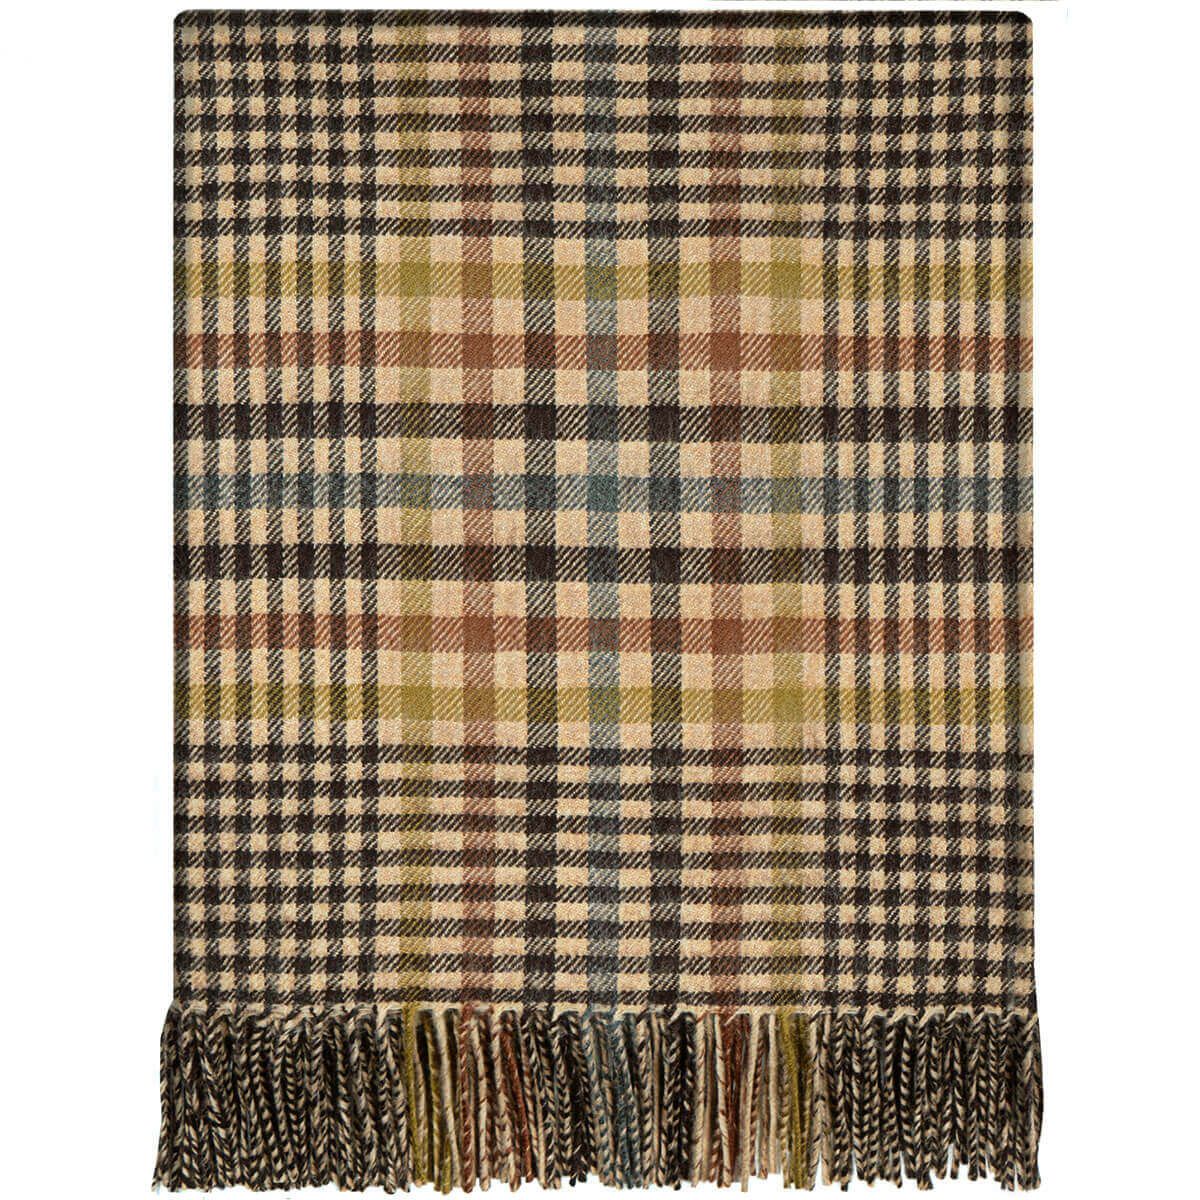 Forth Antique Glen Check Lambswool Blanket - Click Image to Close